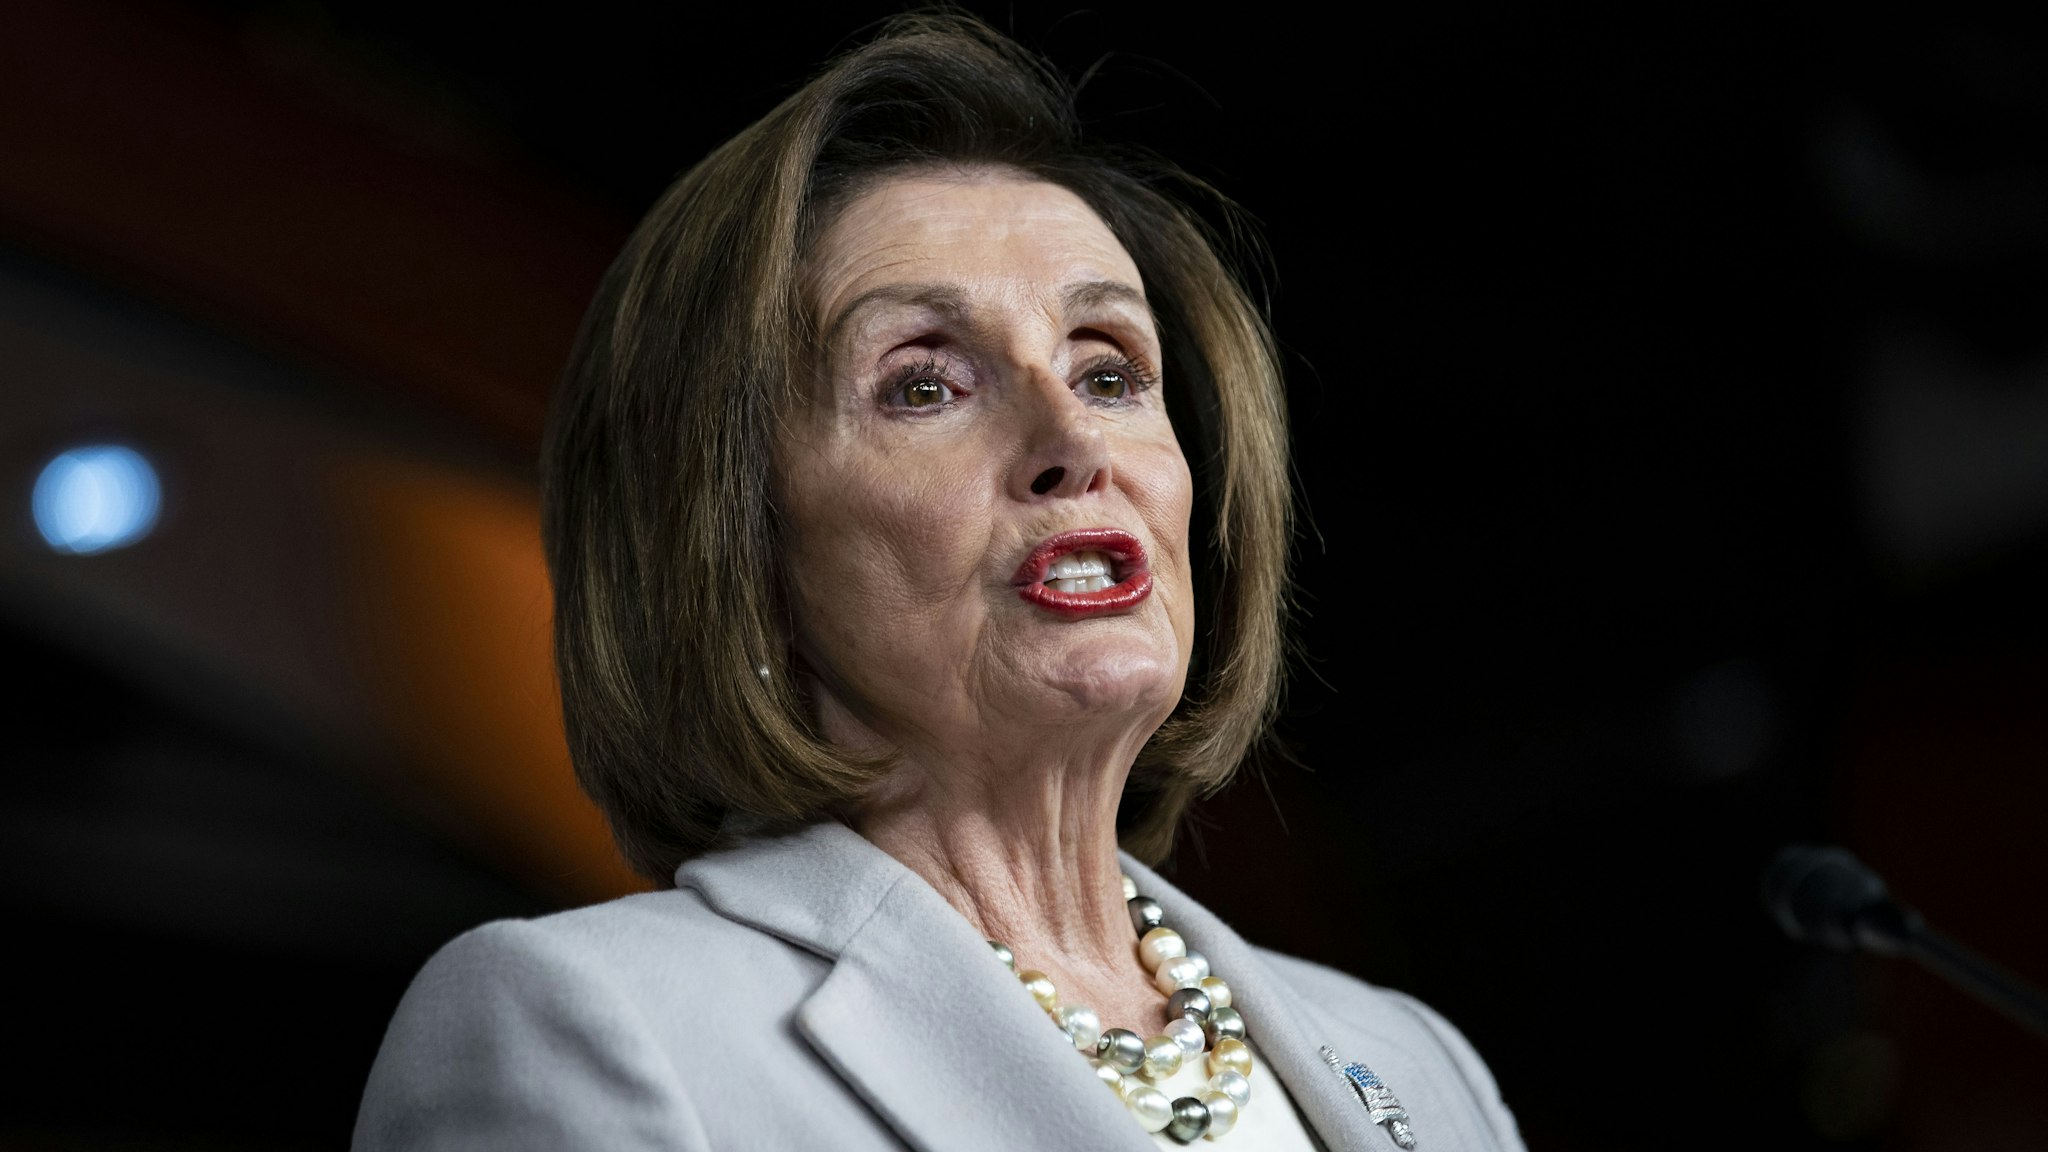 U.S. House Speaker Nancy Pelosi, a Democrat from California, speaks during a news conference on Capitol Hill in Washington, D.C., U.S. on Thursday, Oct. 17, 2019. Pelosi said Thursday that she has "no idea" whether the House impeachment inquiry and a Senate trial could be wrapped up by the end of the year.